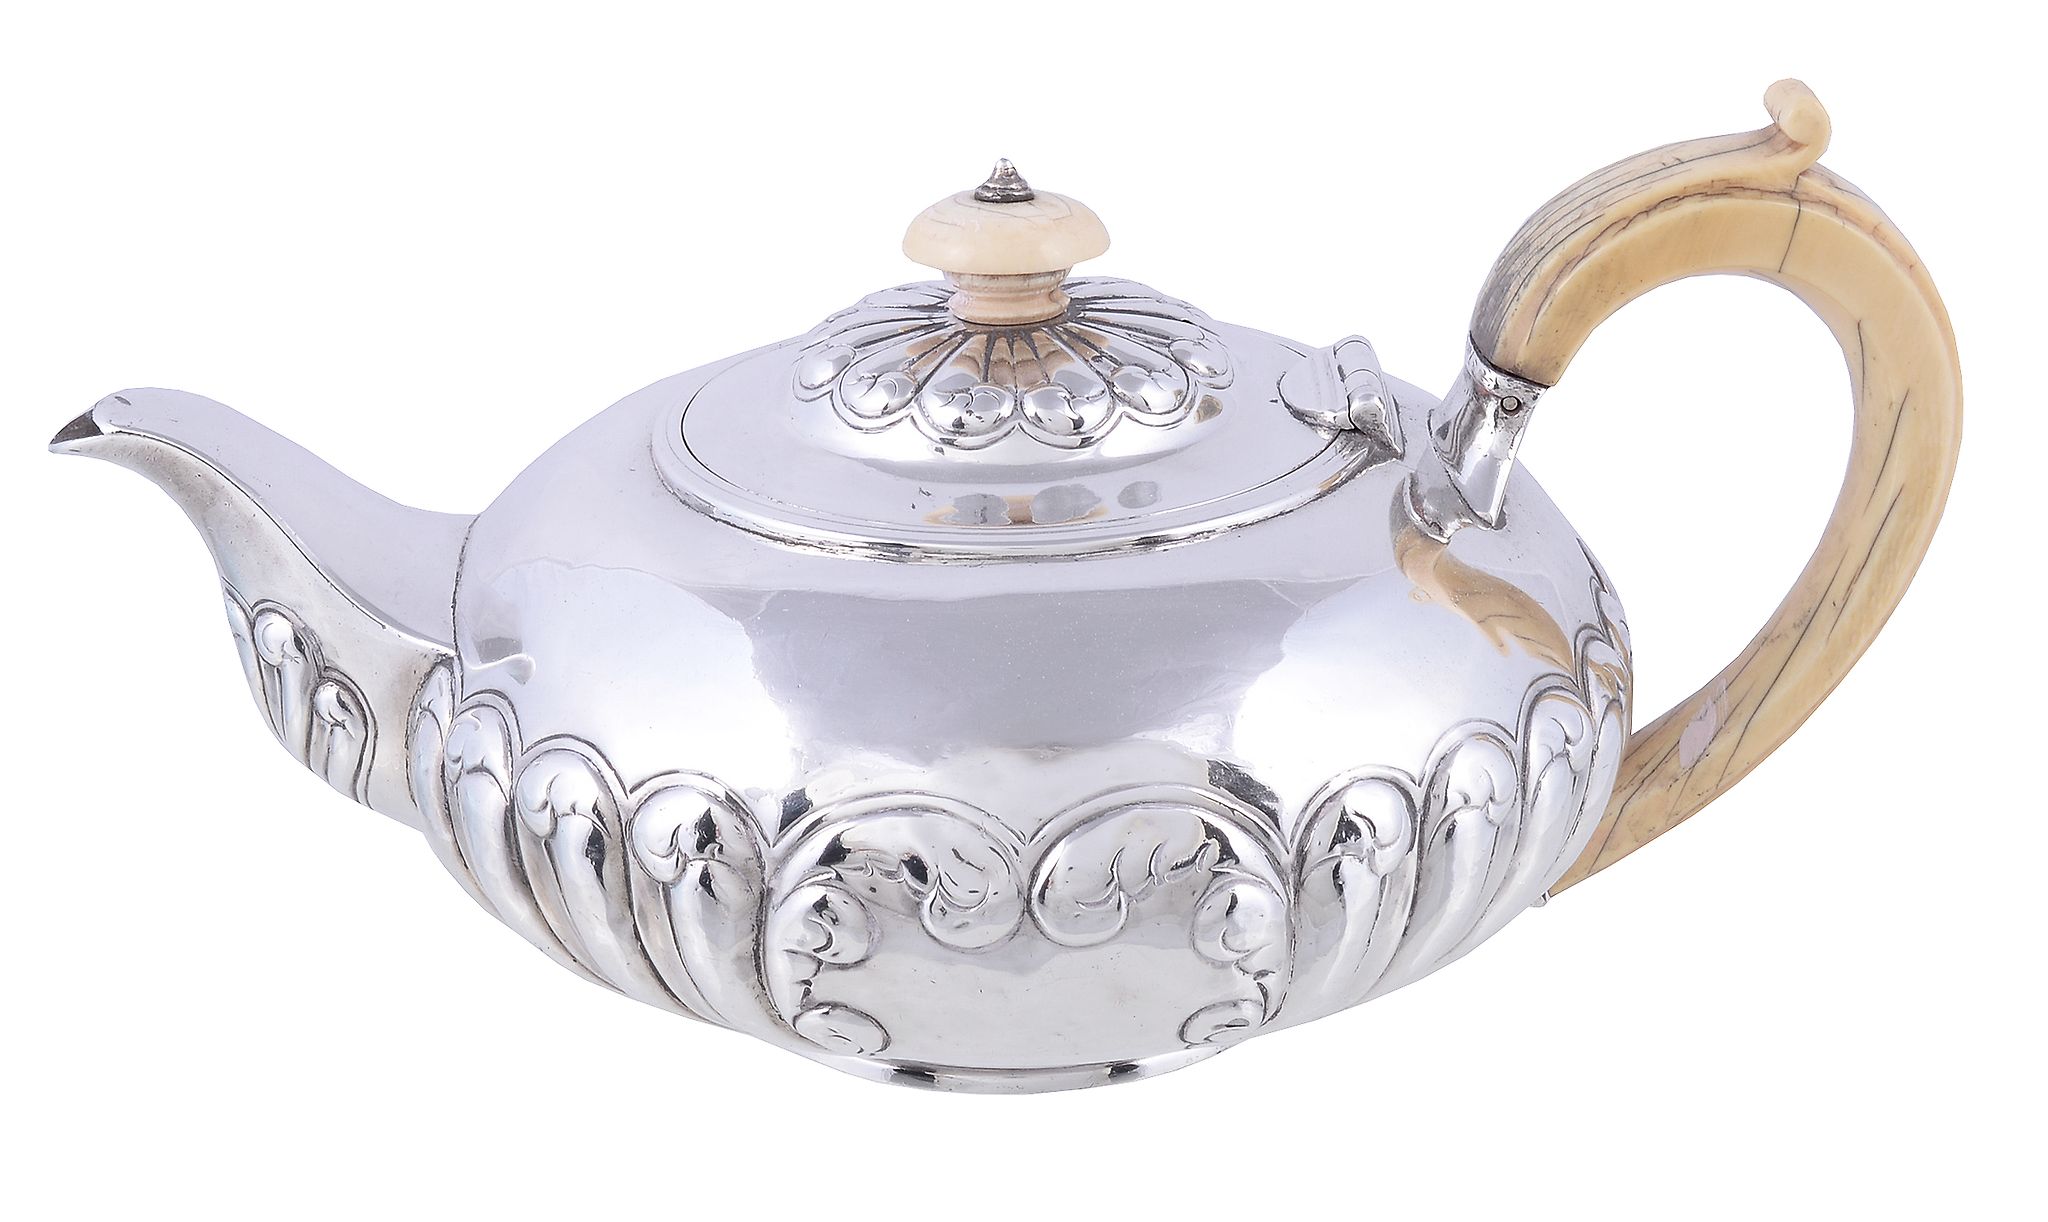 A George IV silver compressed spherical tea pot by James Henry Daniel, London 1821, with an ivory